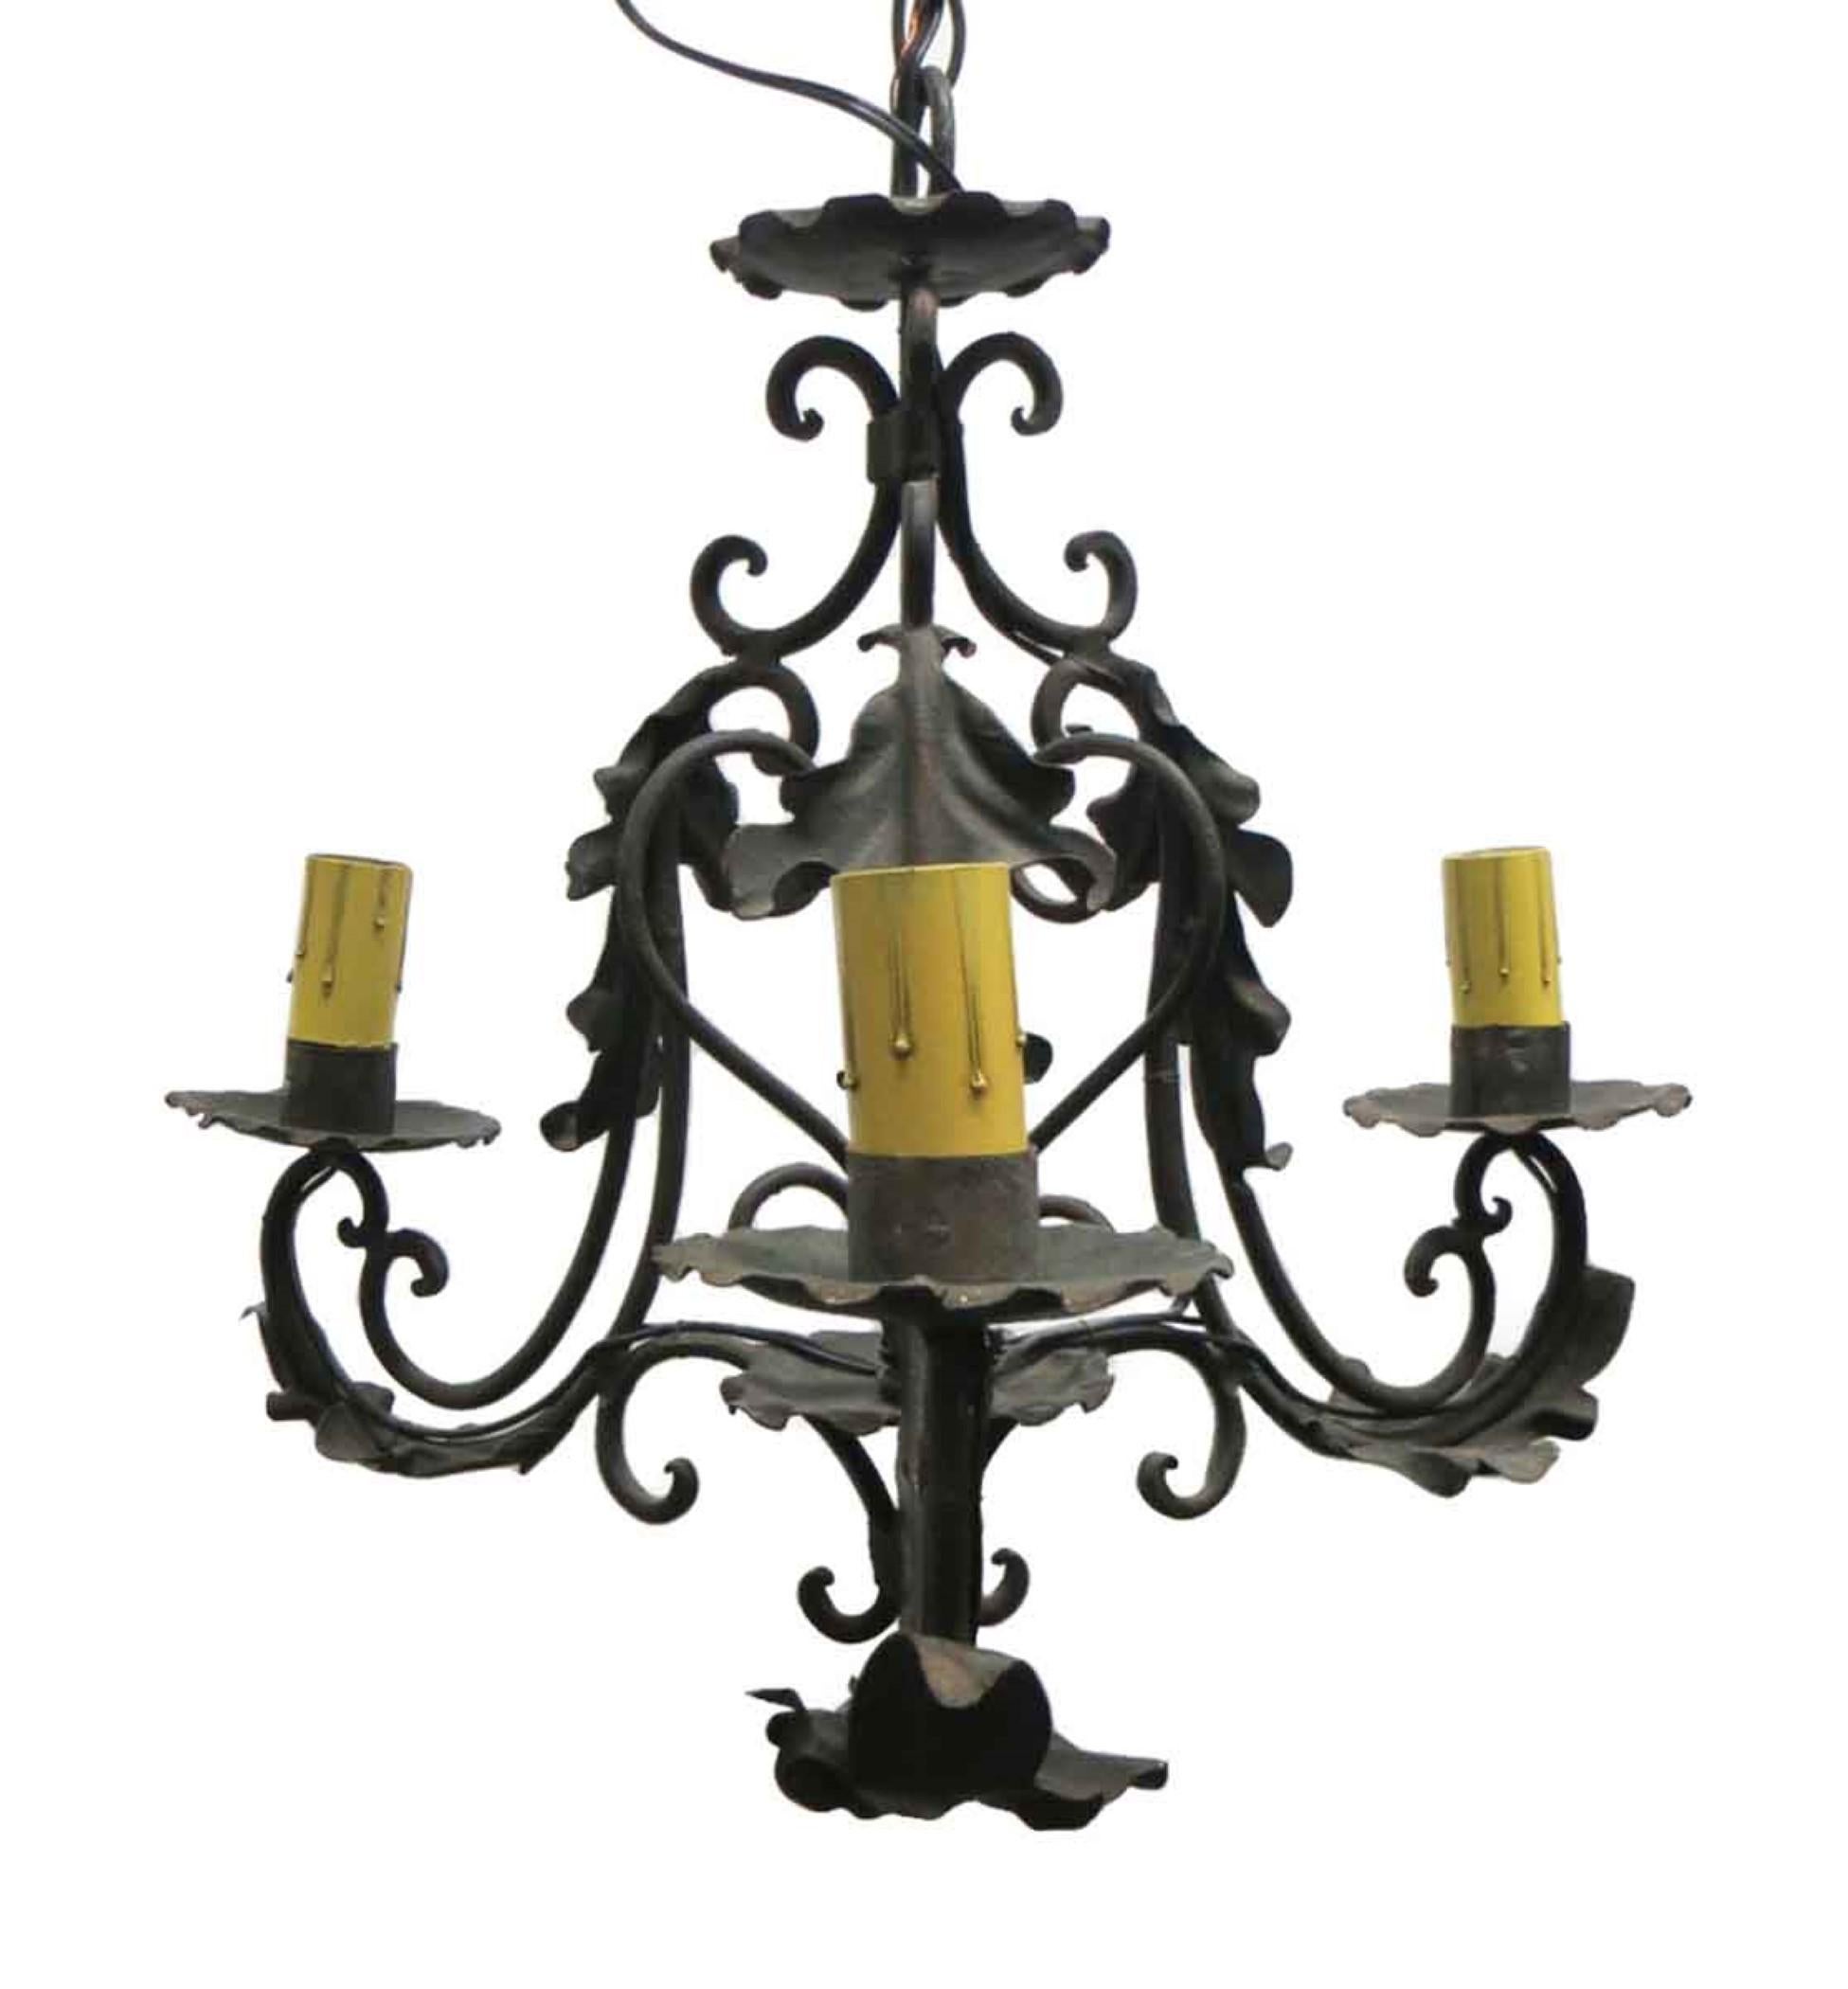 Arts & Crafts style steel and iron three candlestick arm chandelier with scroll and leaf motifs and a blackened finish. This is completely wired with the canopy. This can be seen at our 400 Gilligan St location in Scranton, PA.